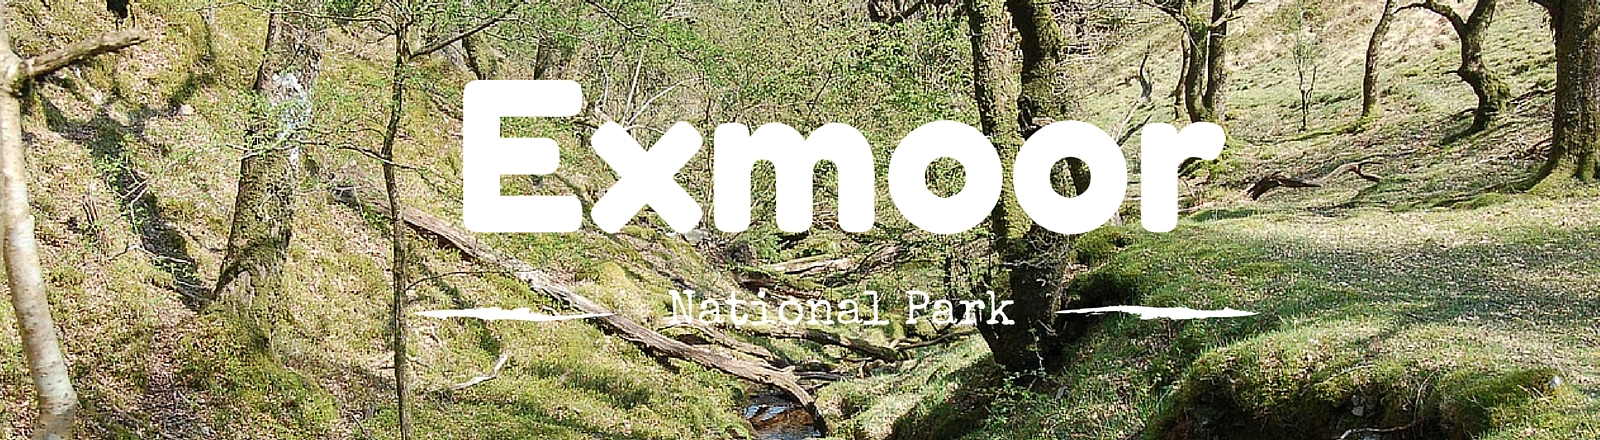 Exmoor National Park | National Parks Guy